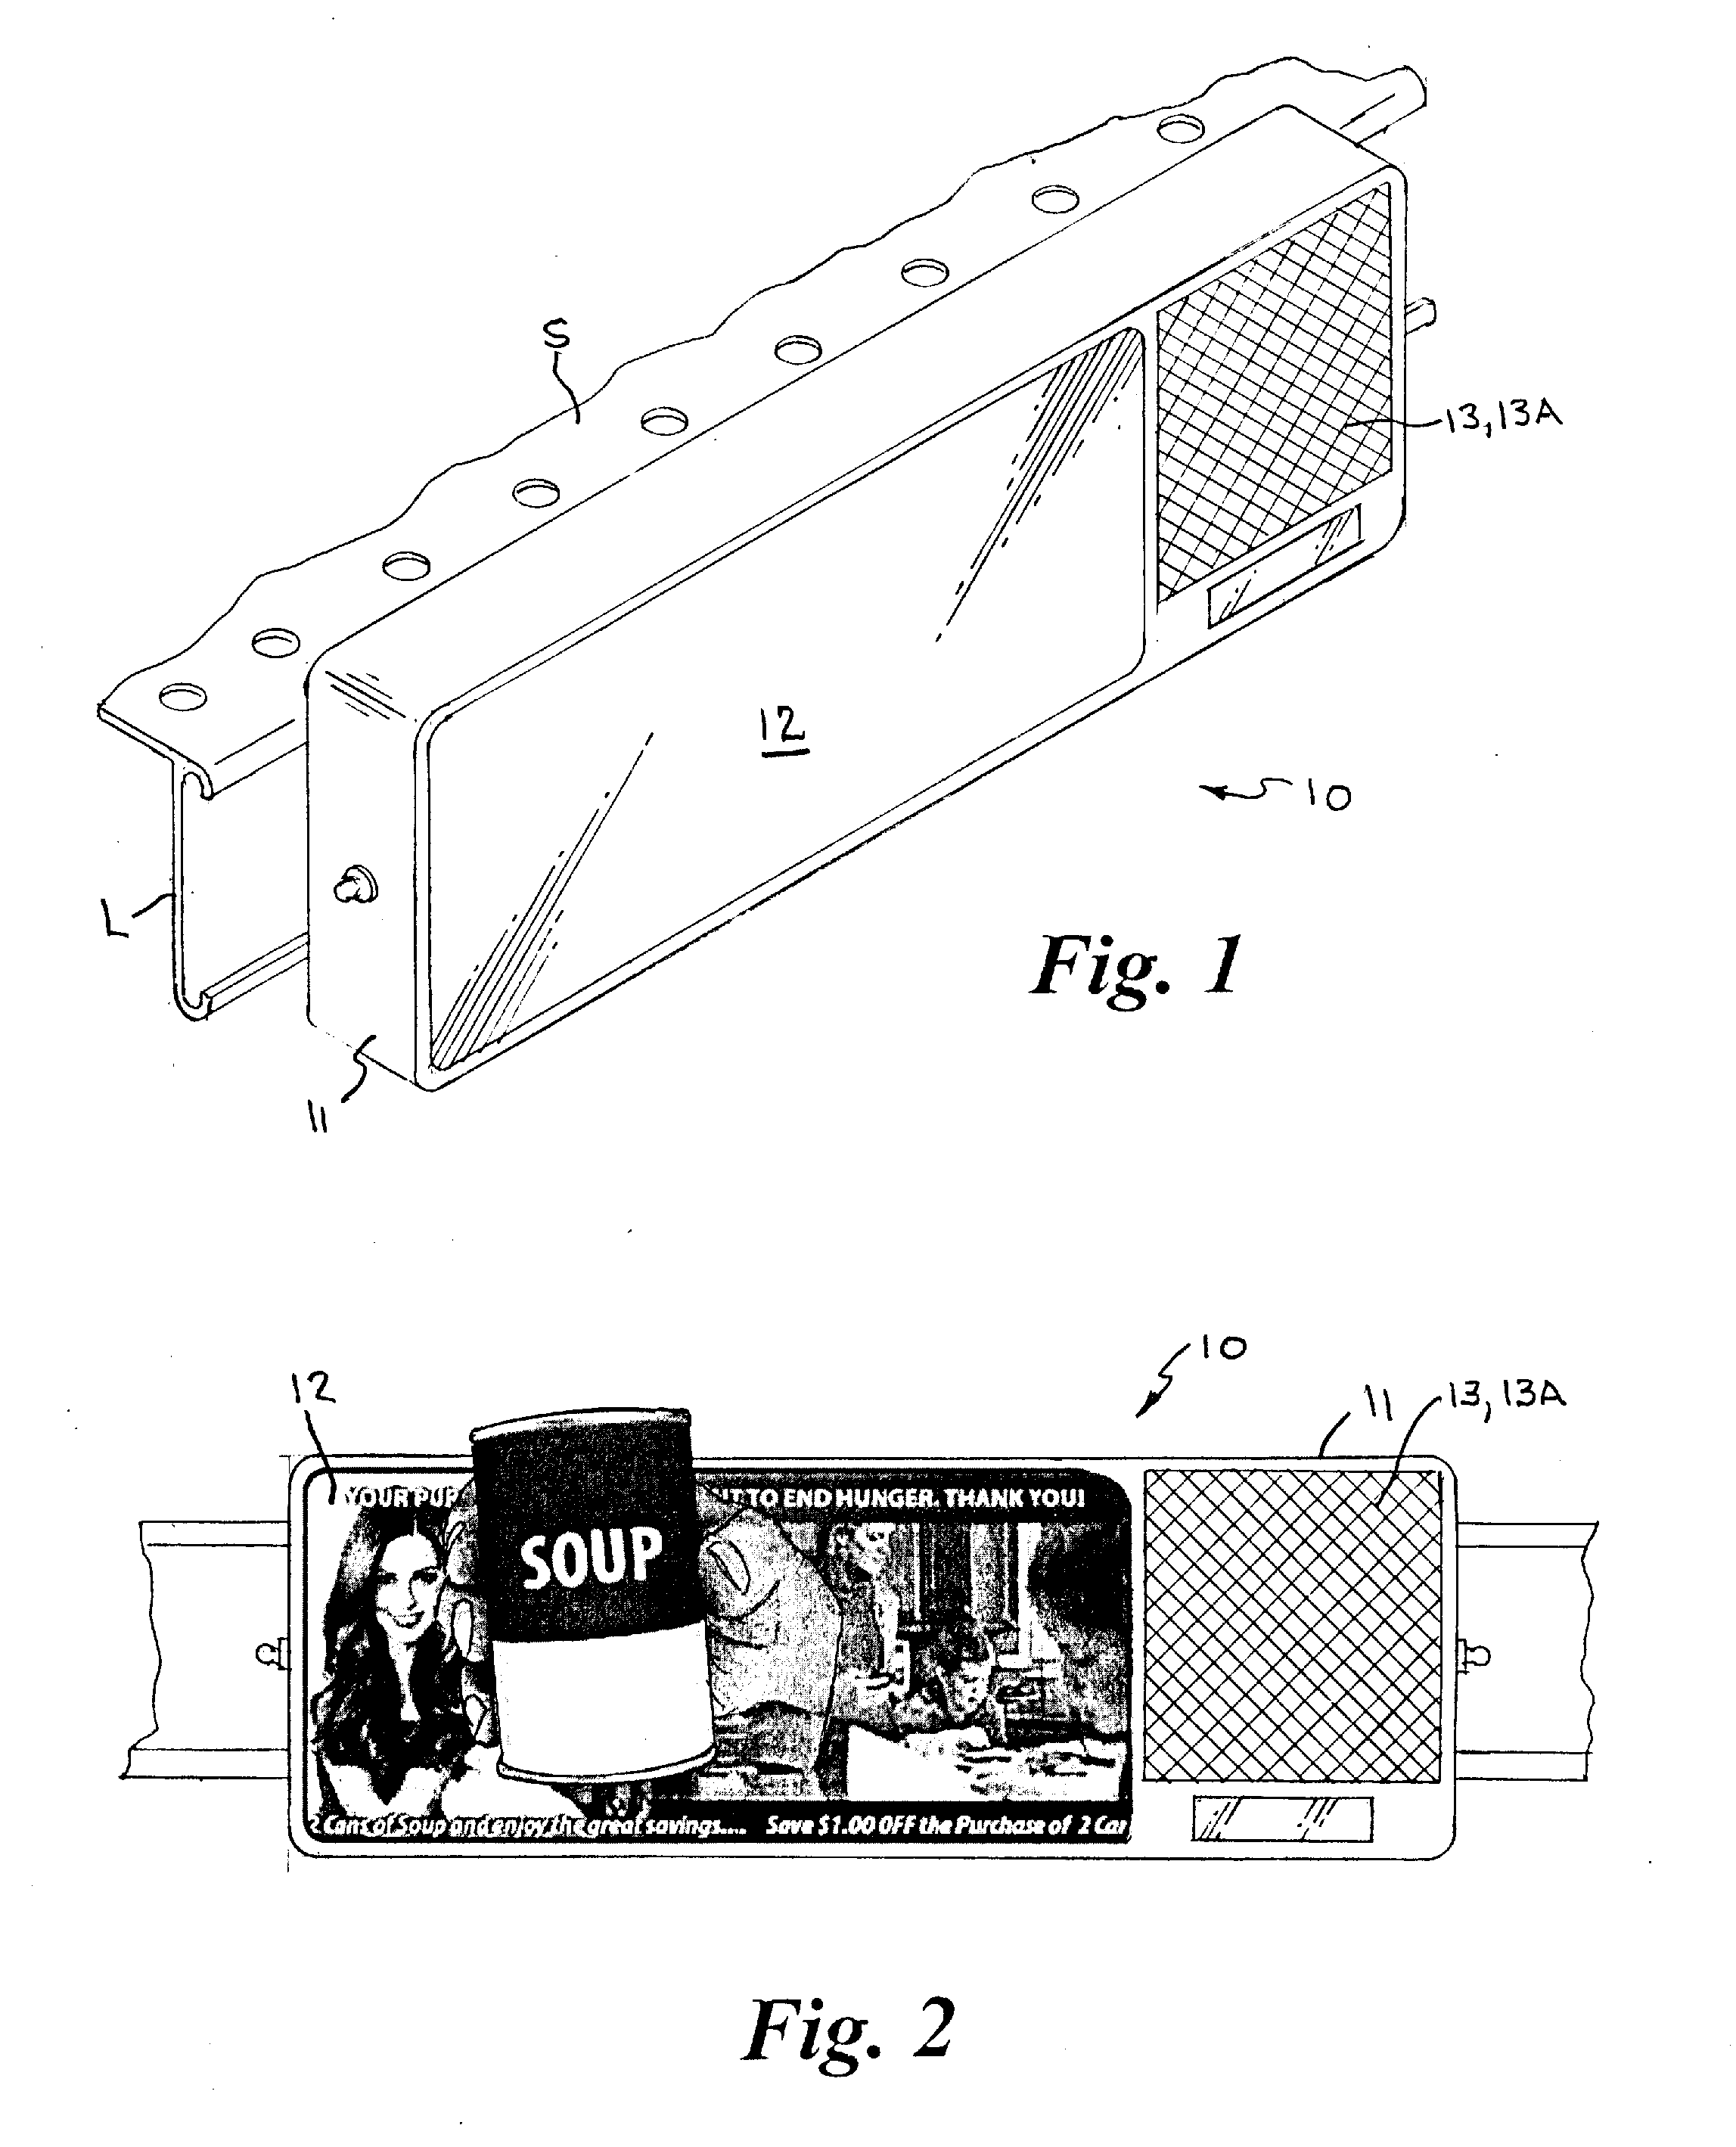 Glasses-free 3D advertising system and method